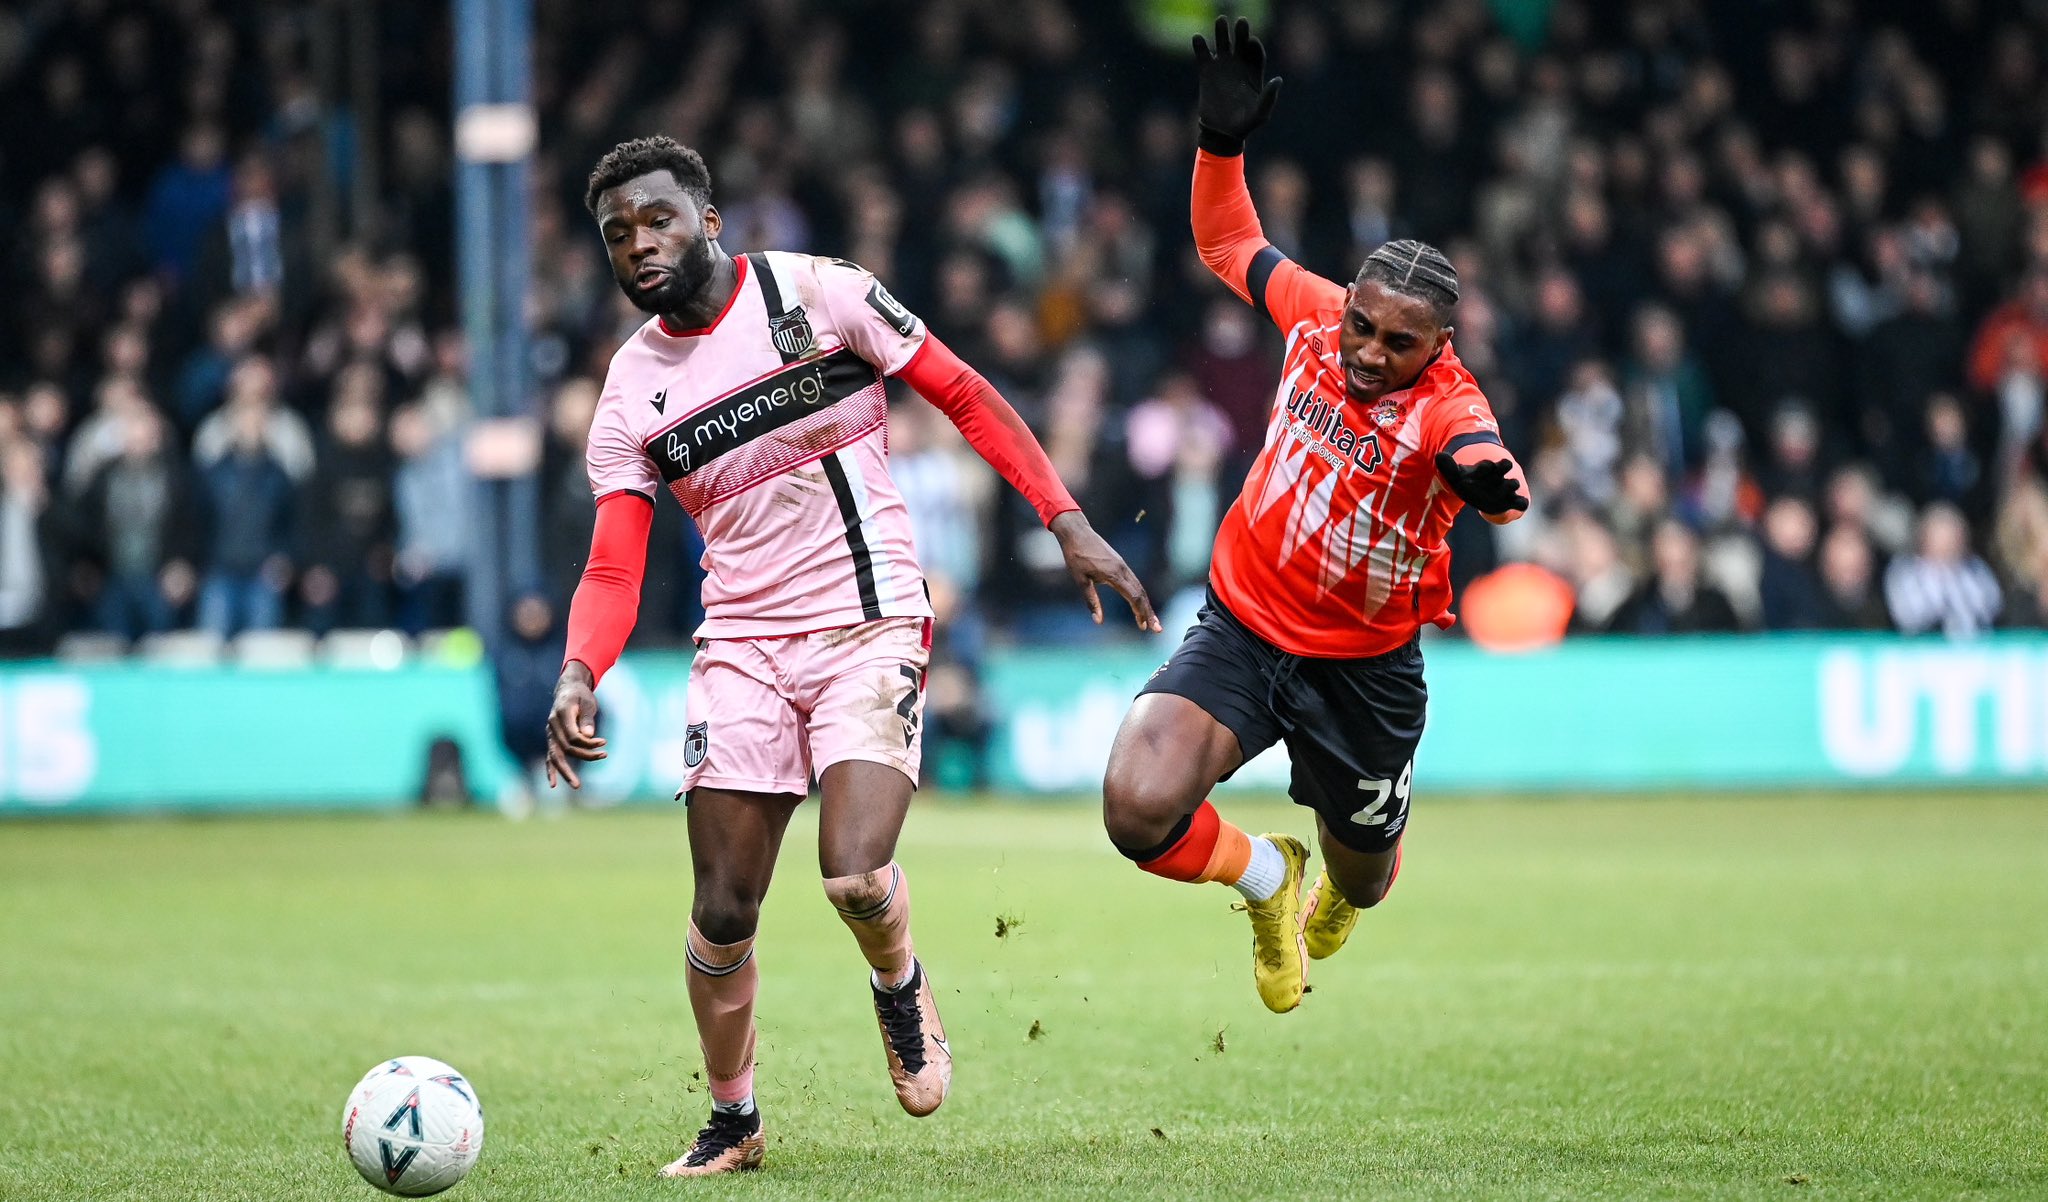 Luton Town 2- 2 Grimsby Town